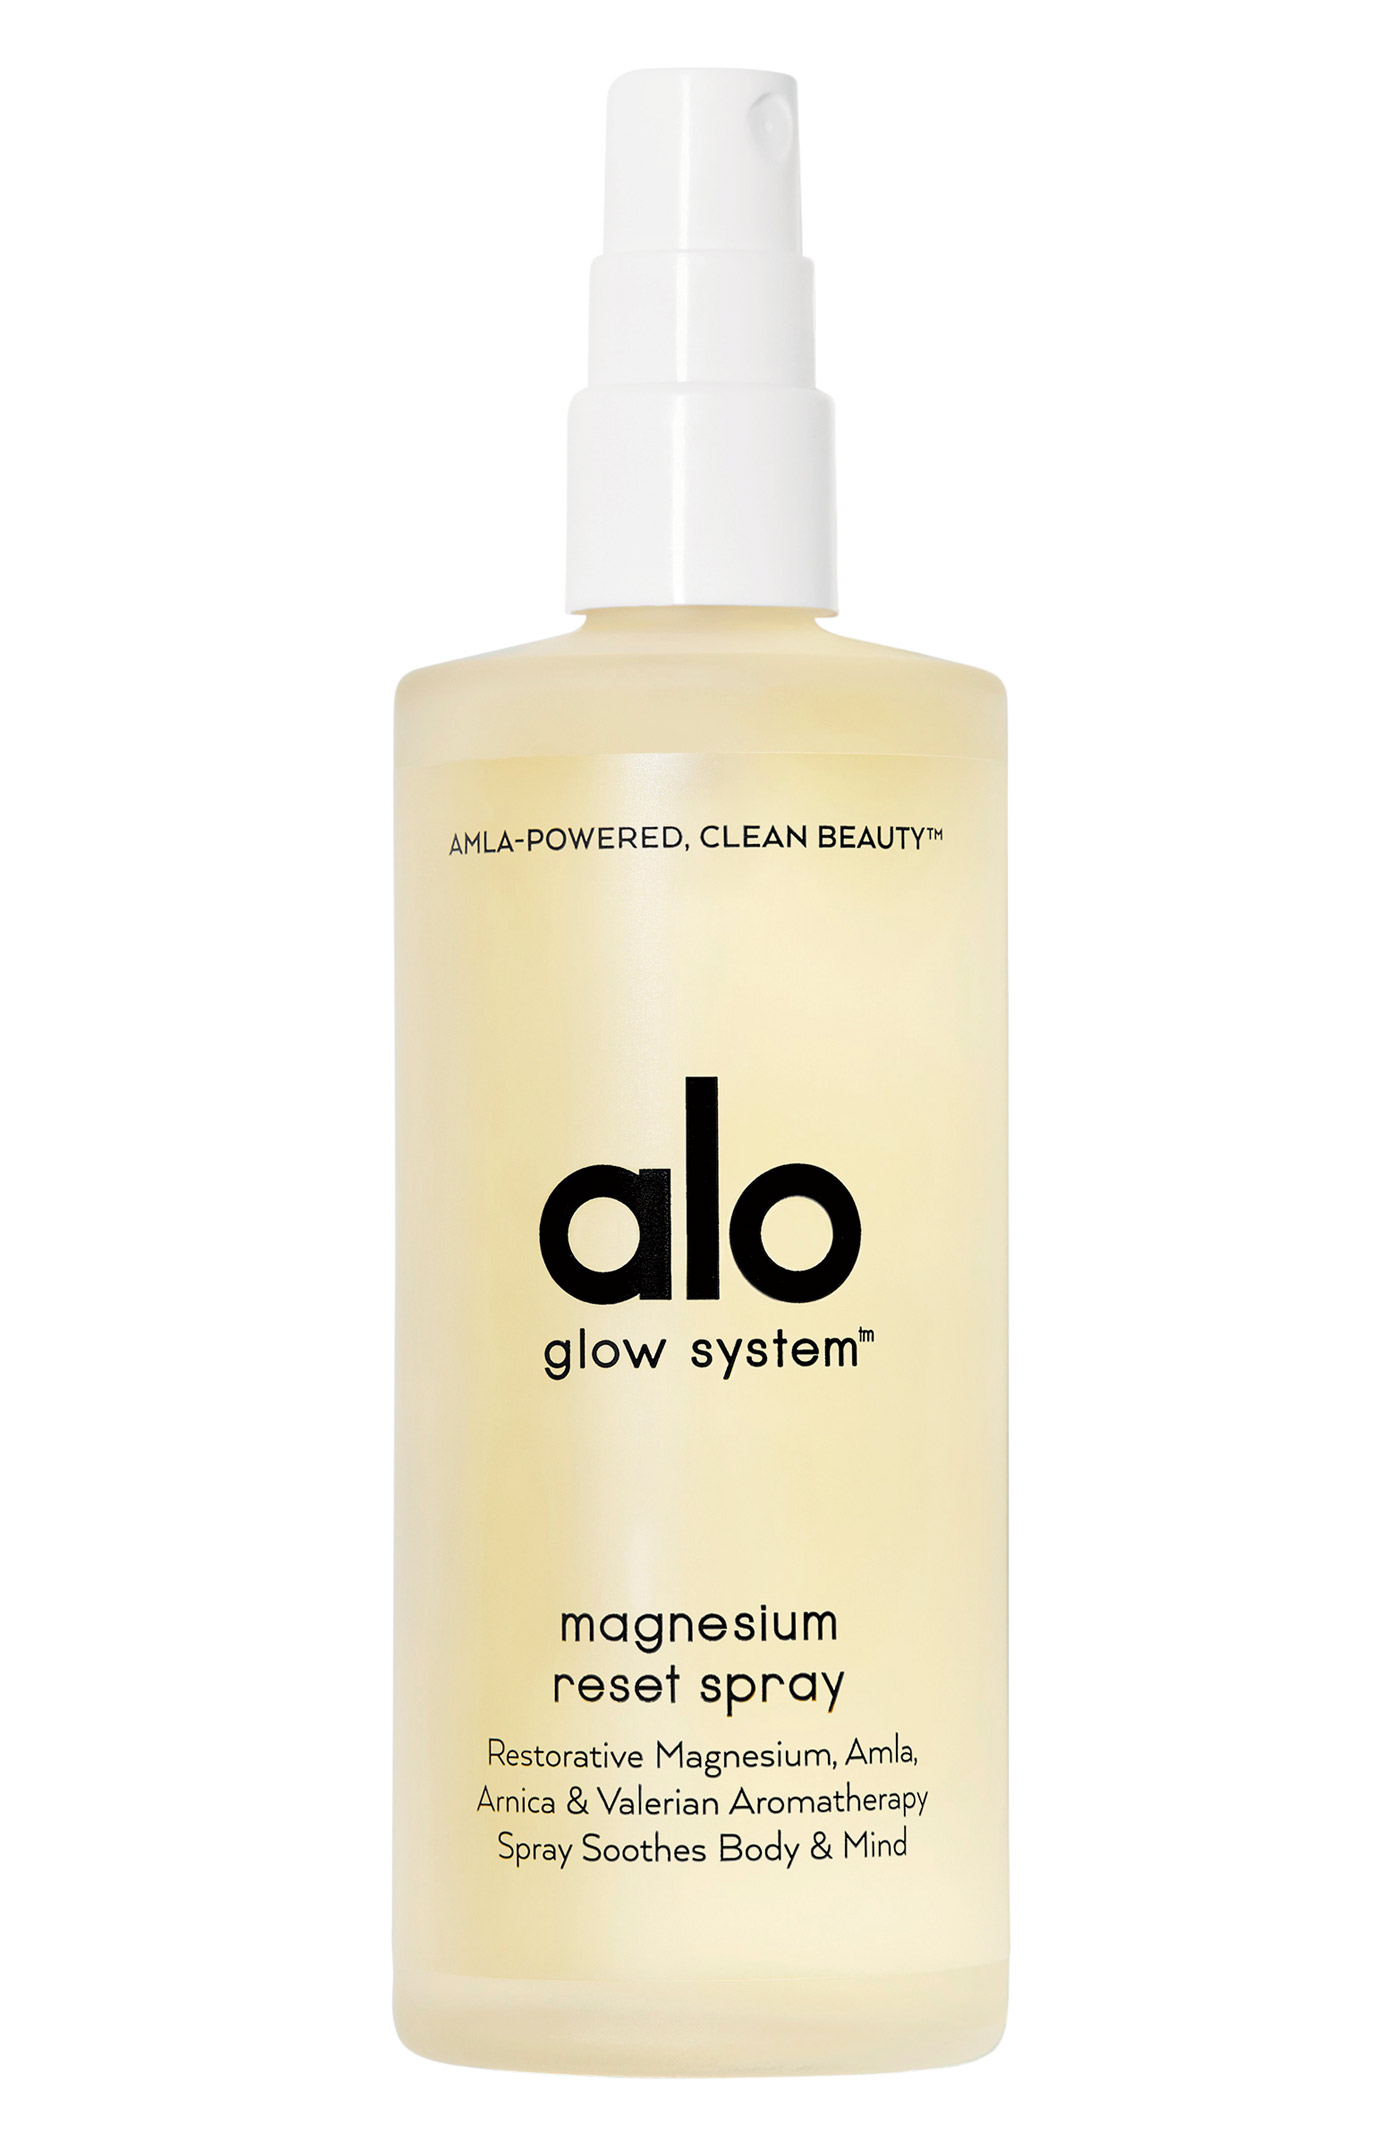 Sr2023 02 283 Alo Magnesium Reset Spray, Nordstrom Old Orchard, 847 677 2121